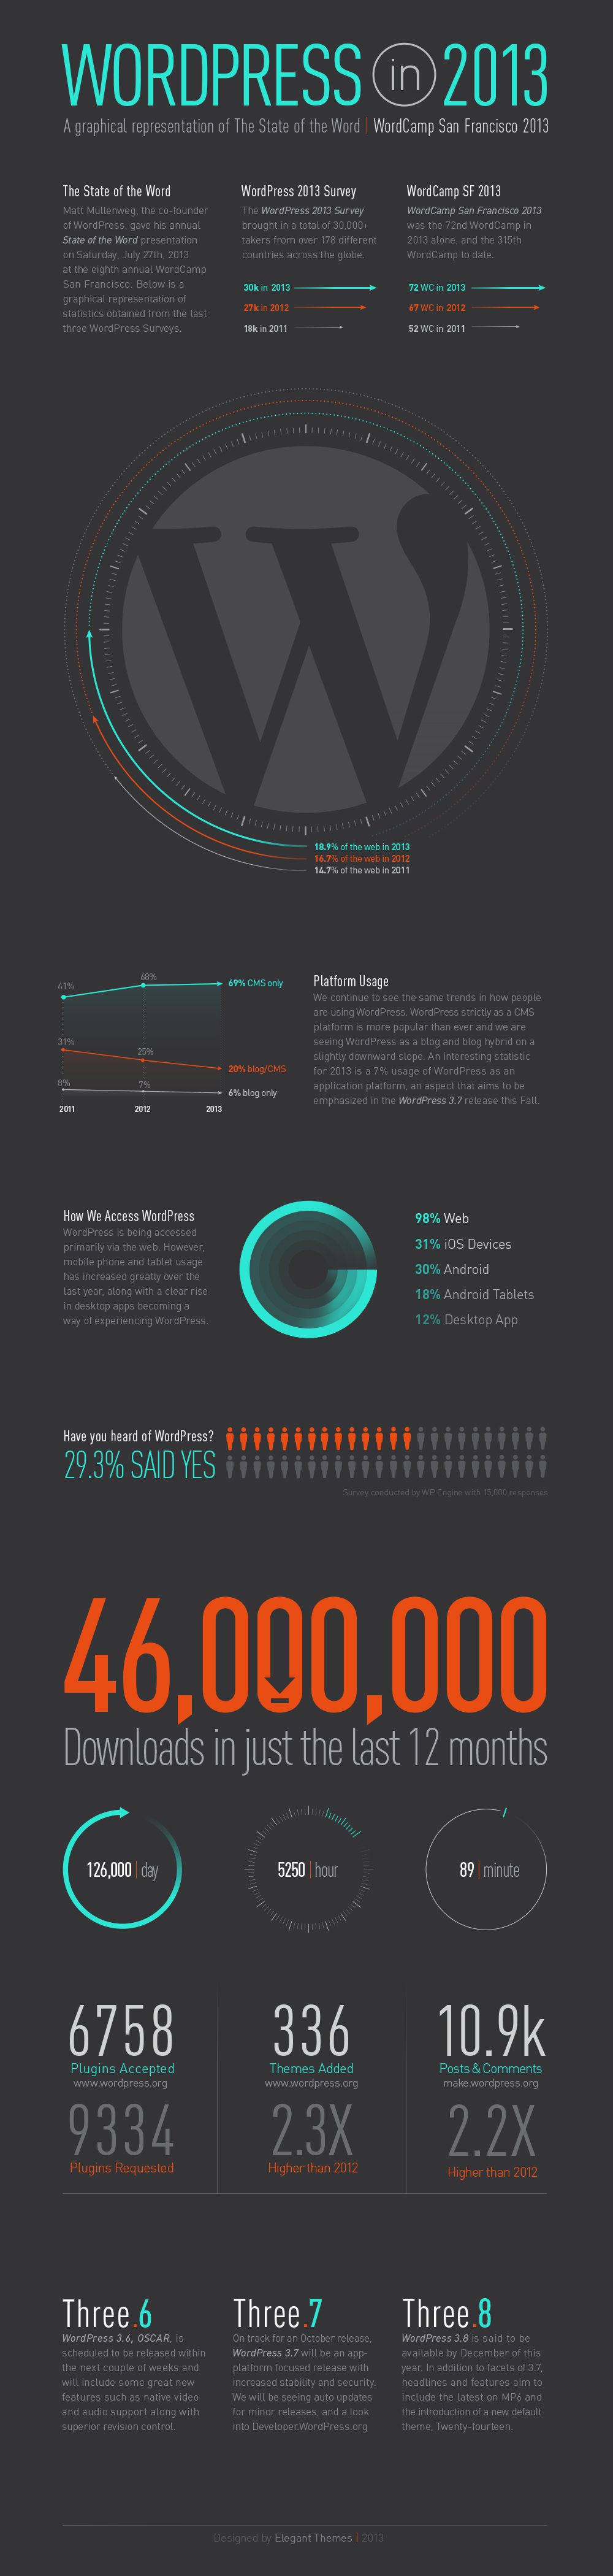 The State Of The Word infographic on WordPress's year in 2013.